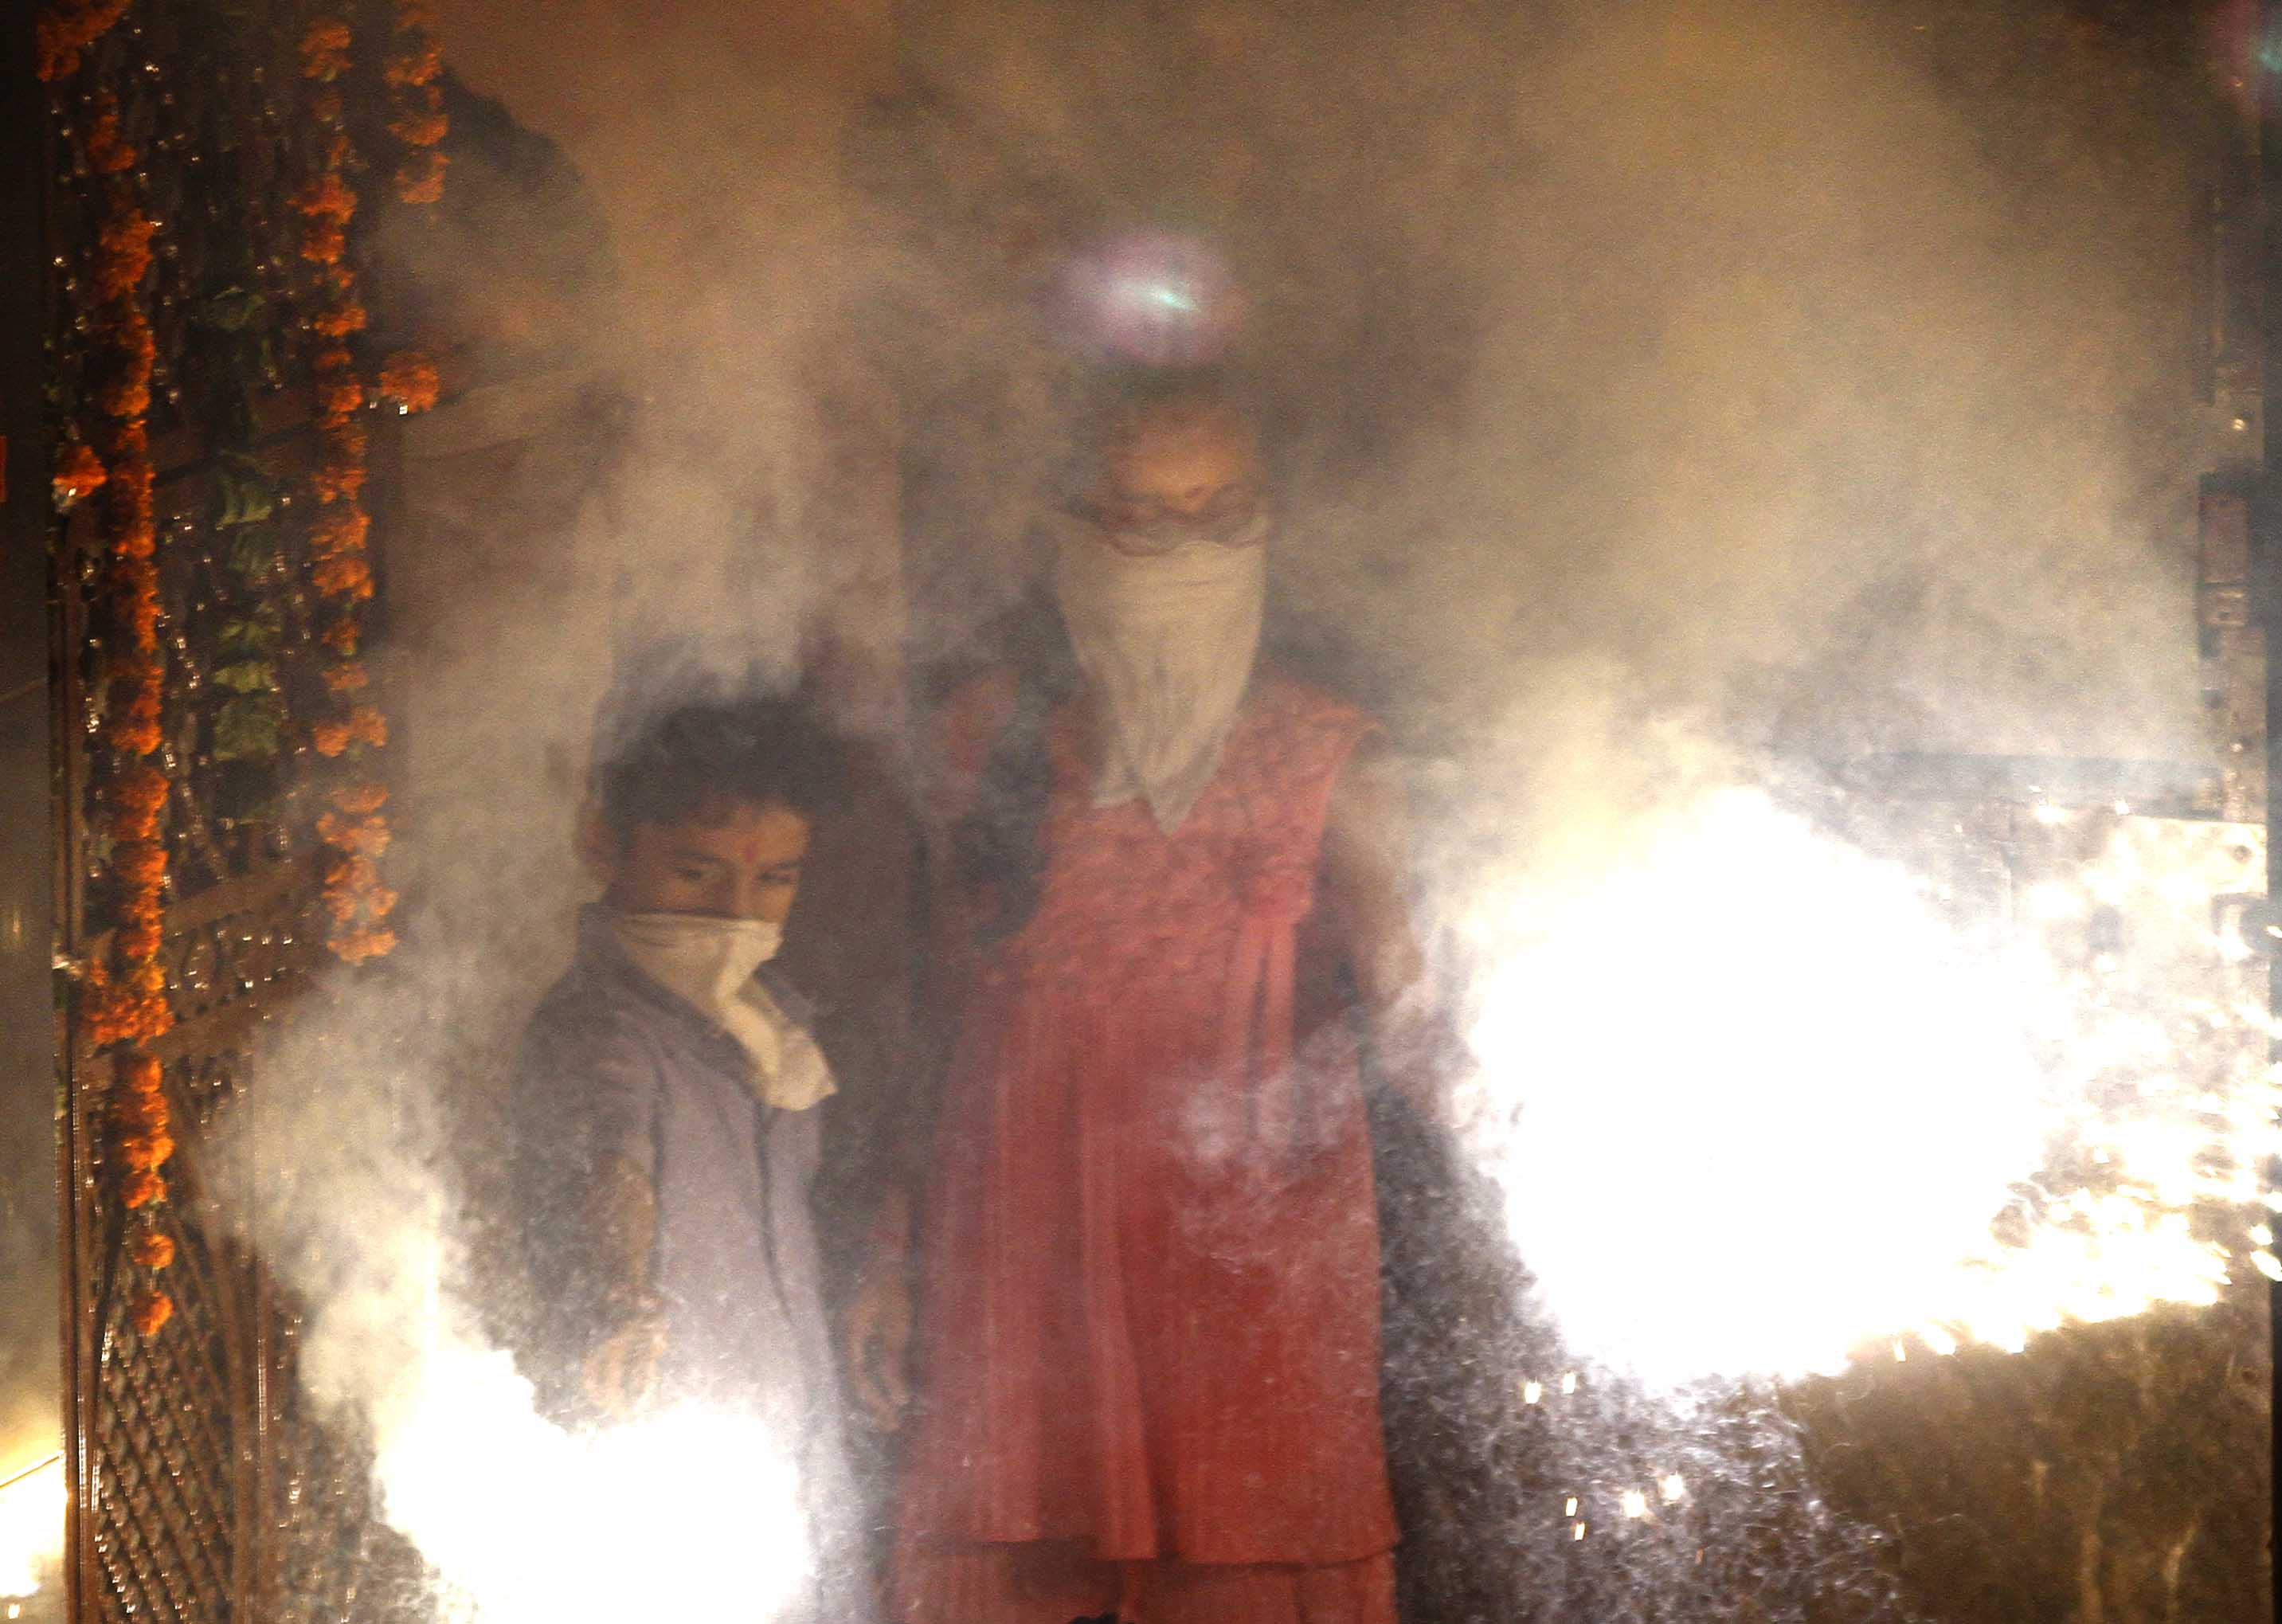 People bursting firecrackers as they celebrate Diwali, the Festival of Light, on Oct. 23, 2014, in New Delhi (Arun Sharma—Hindustan Times via Getty Images)